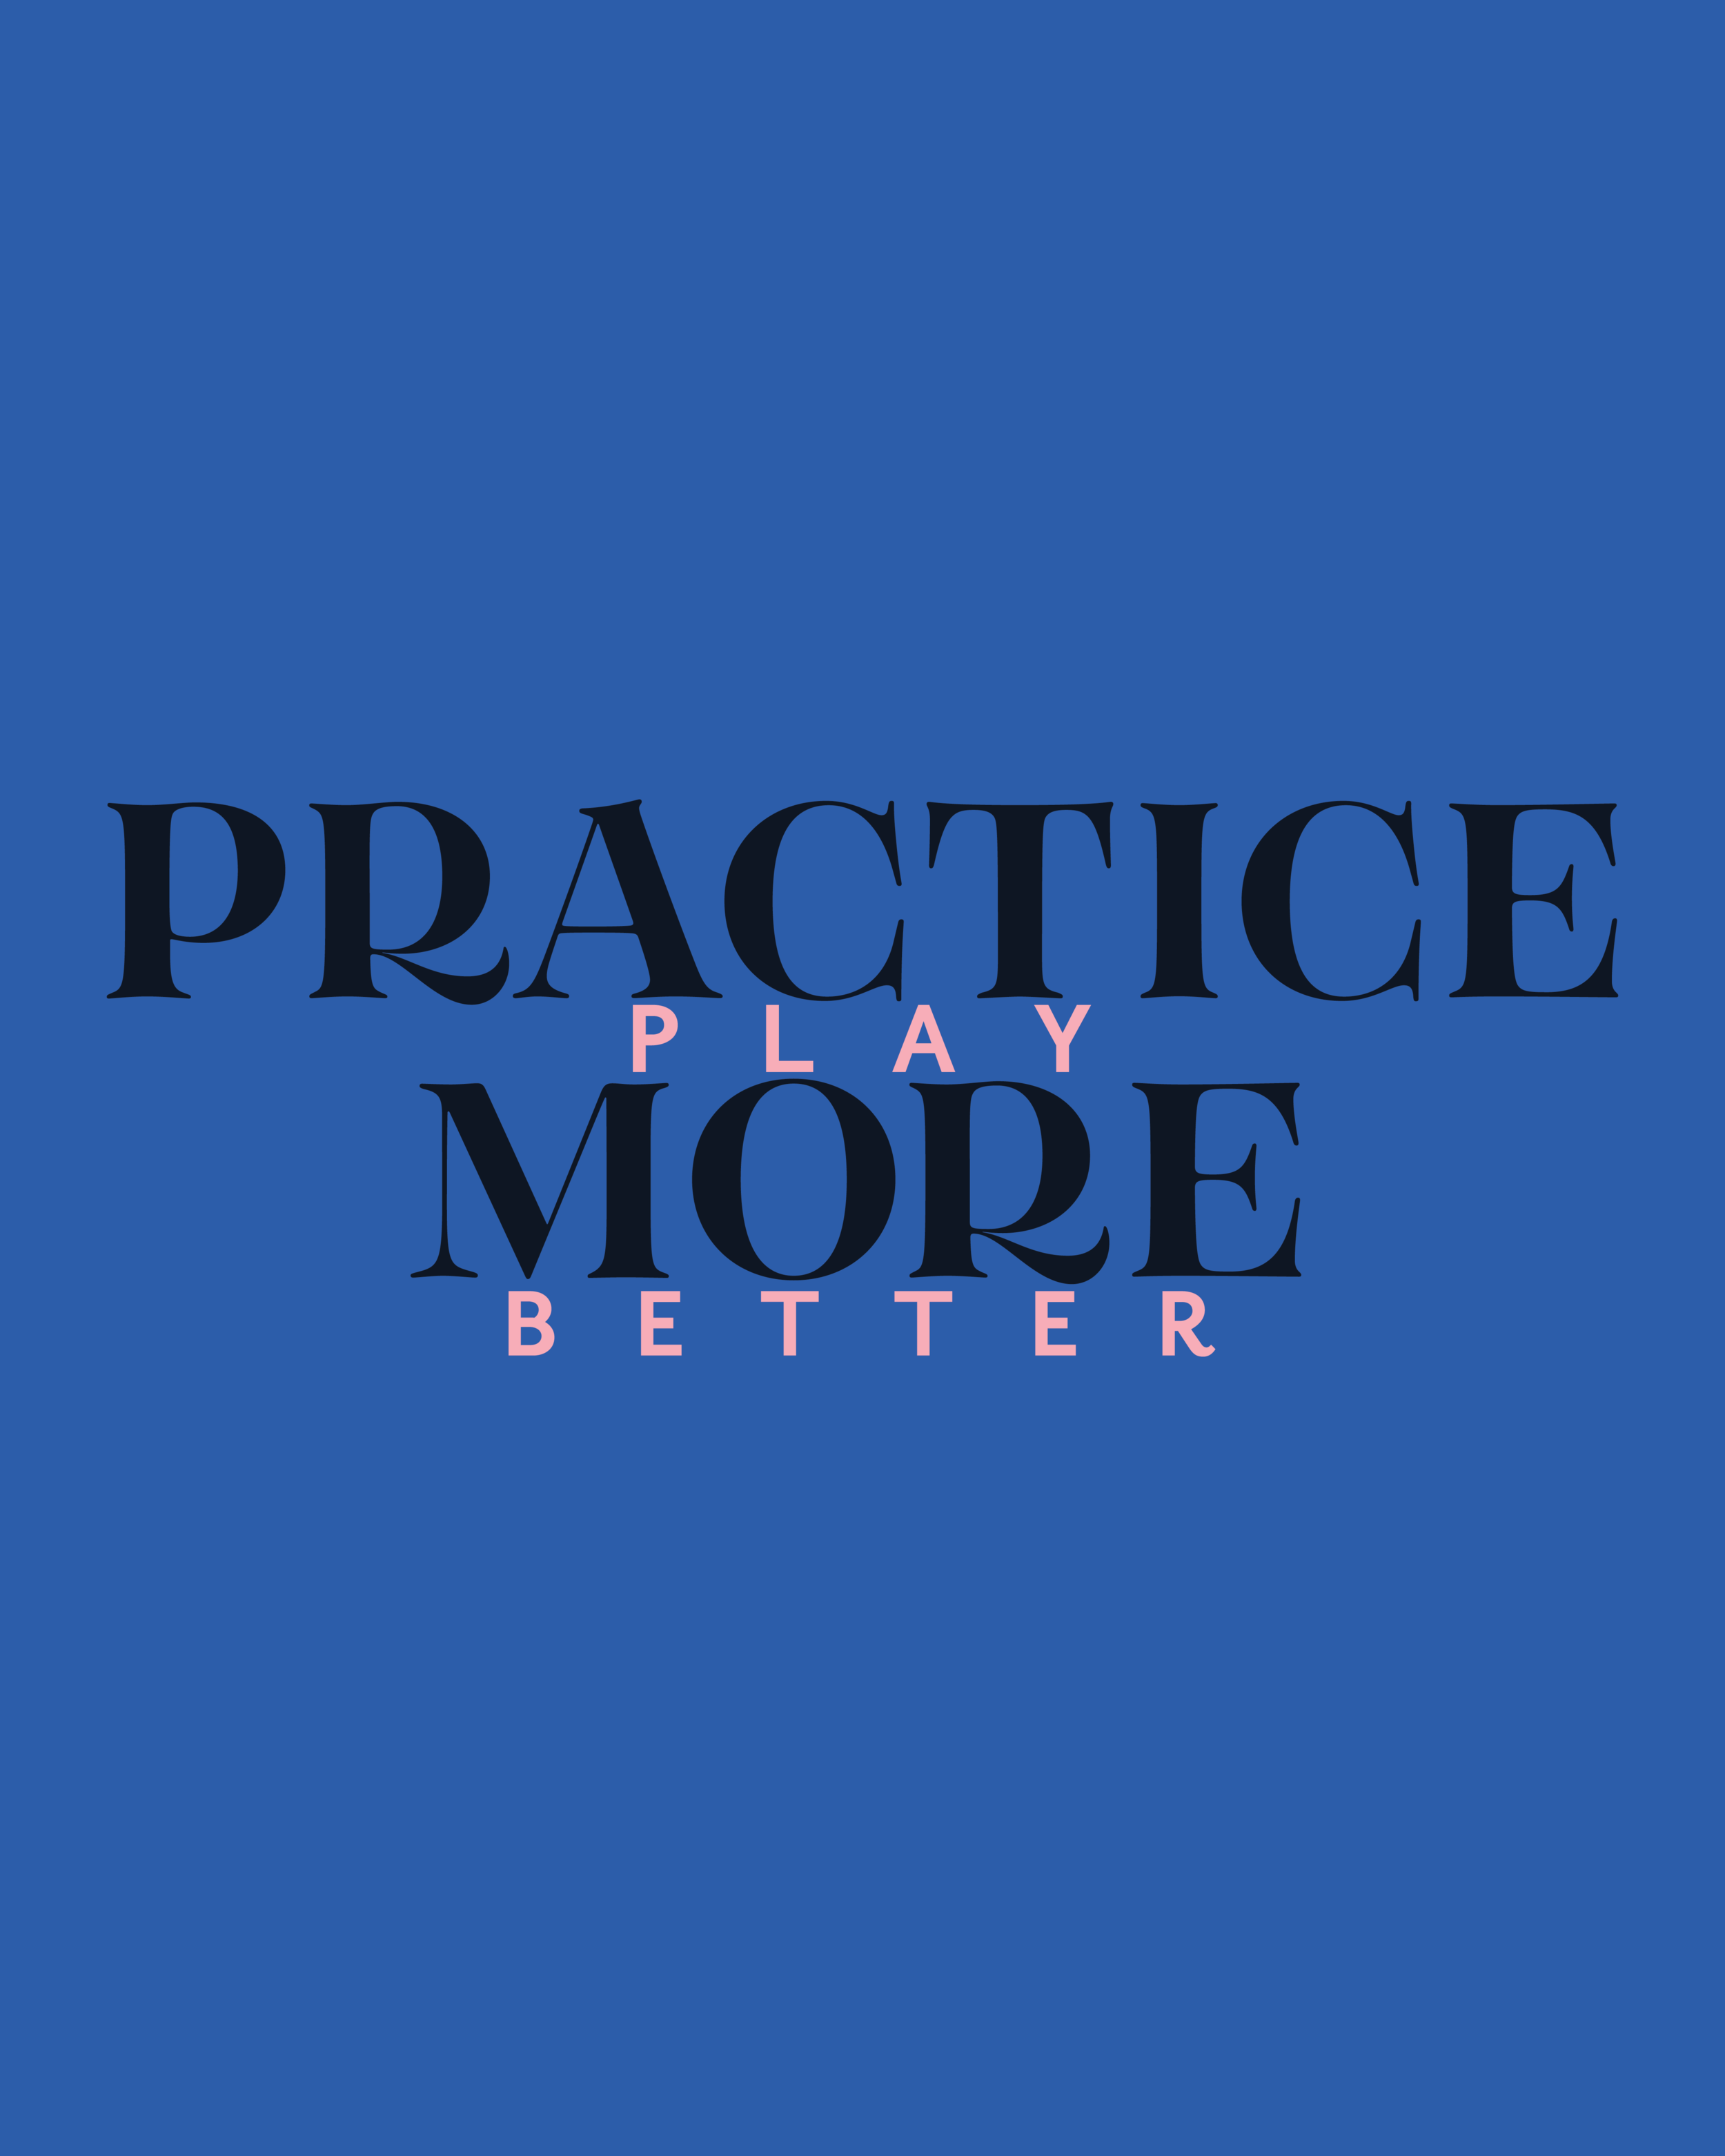  “Practice more, play better” graphic design for social media event promotion. 